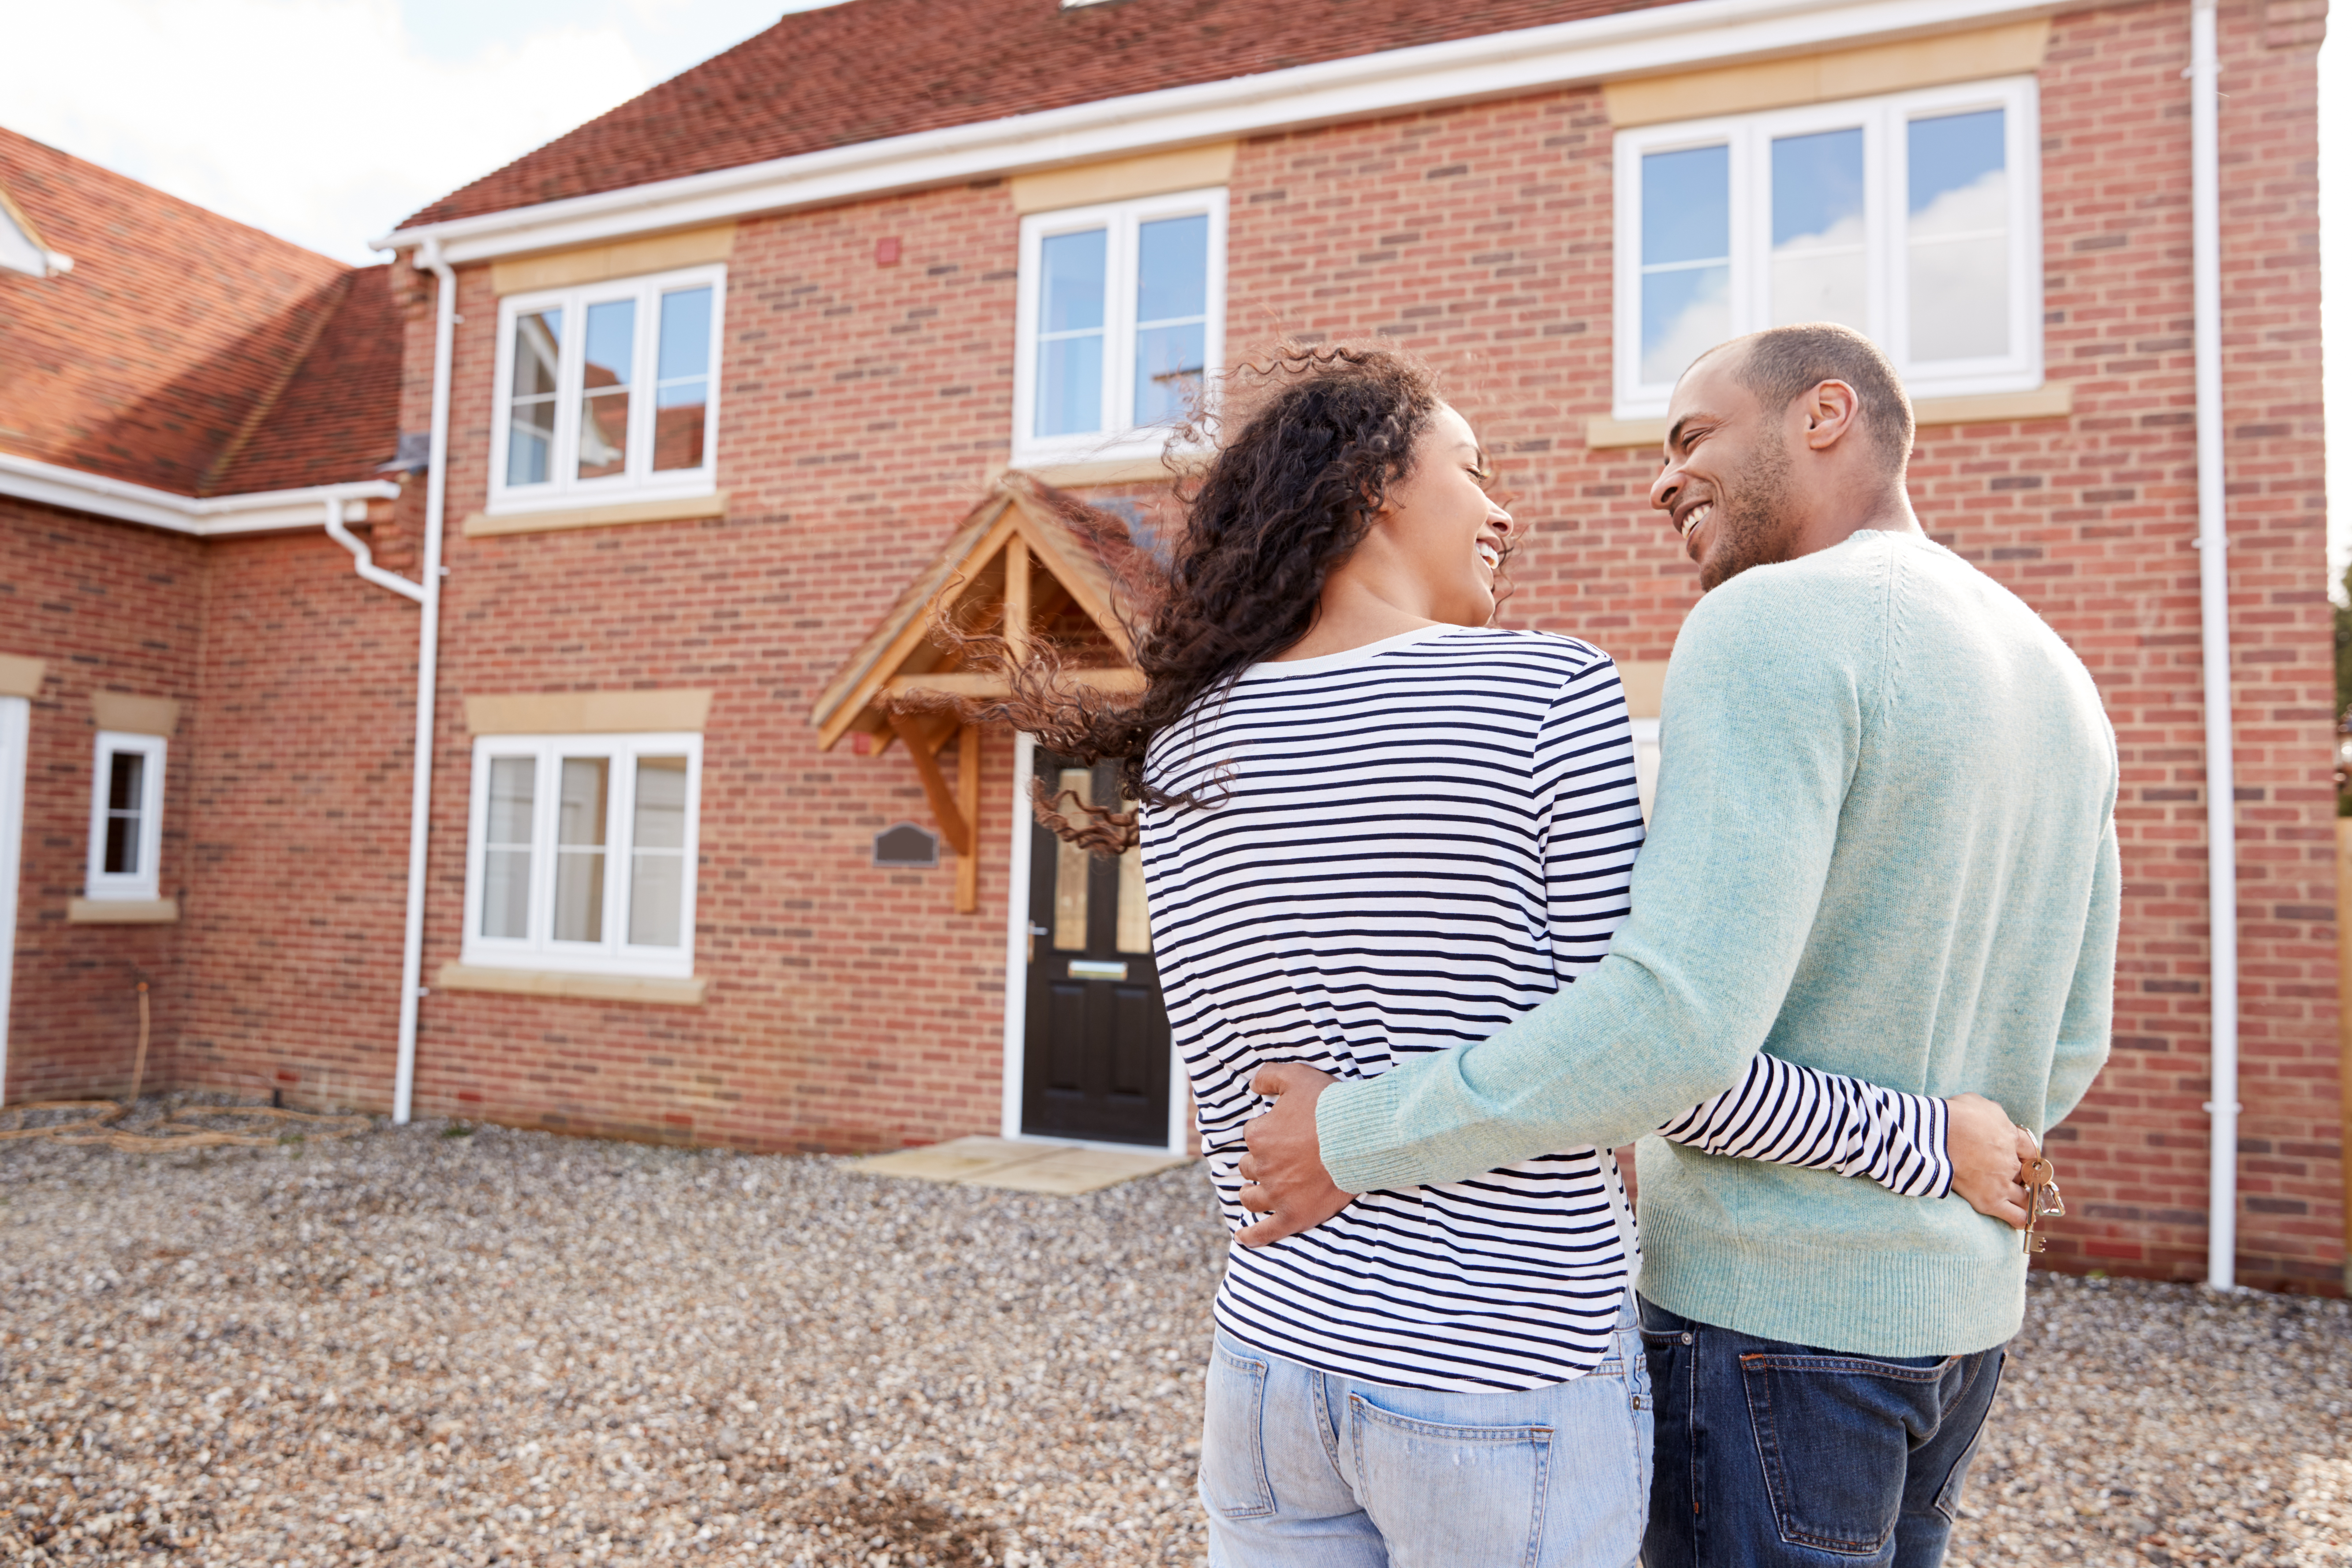 A young couple embrace in front of their new home.